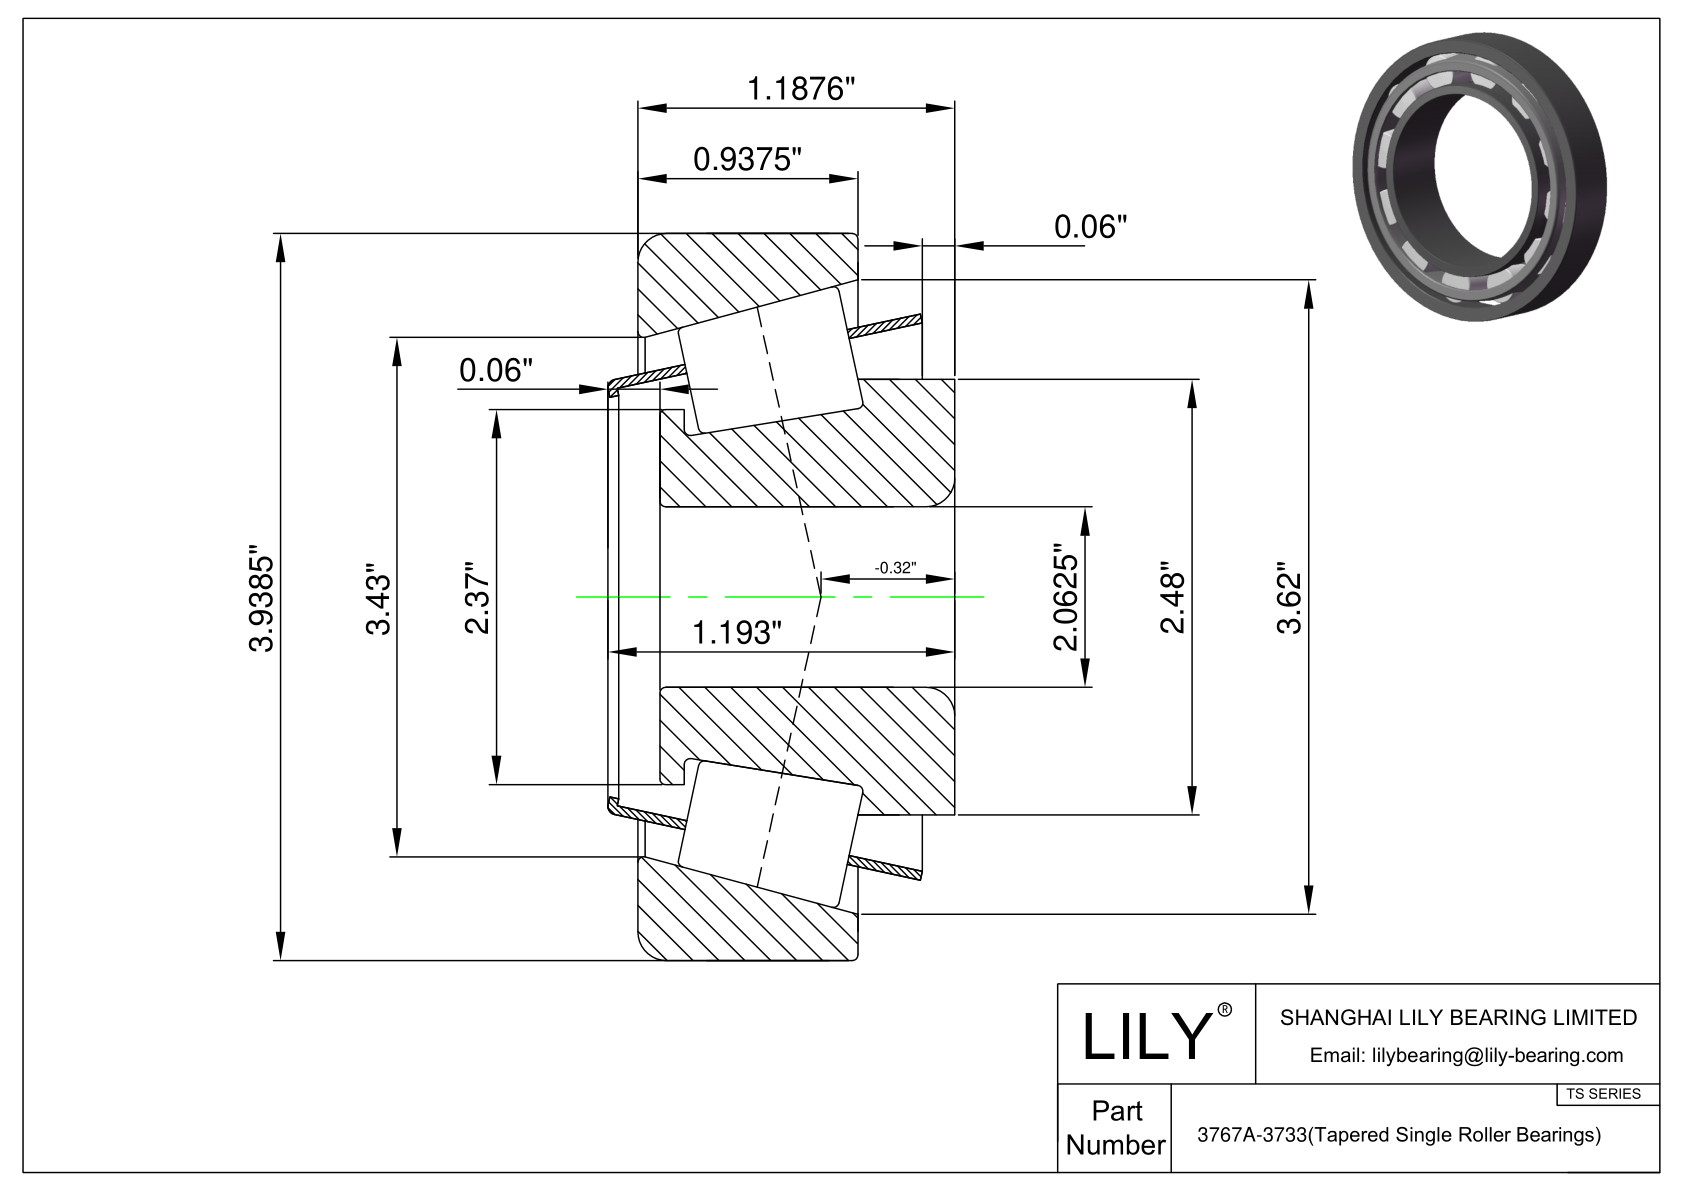 3767A-3733 TS (Tapered Single Roller Bearings) (Imperial) cad drawing